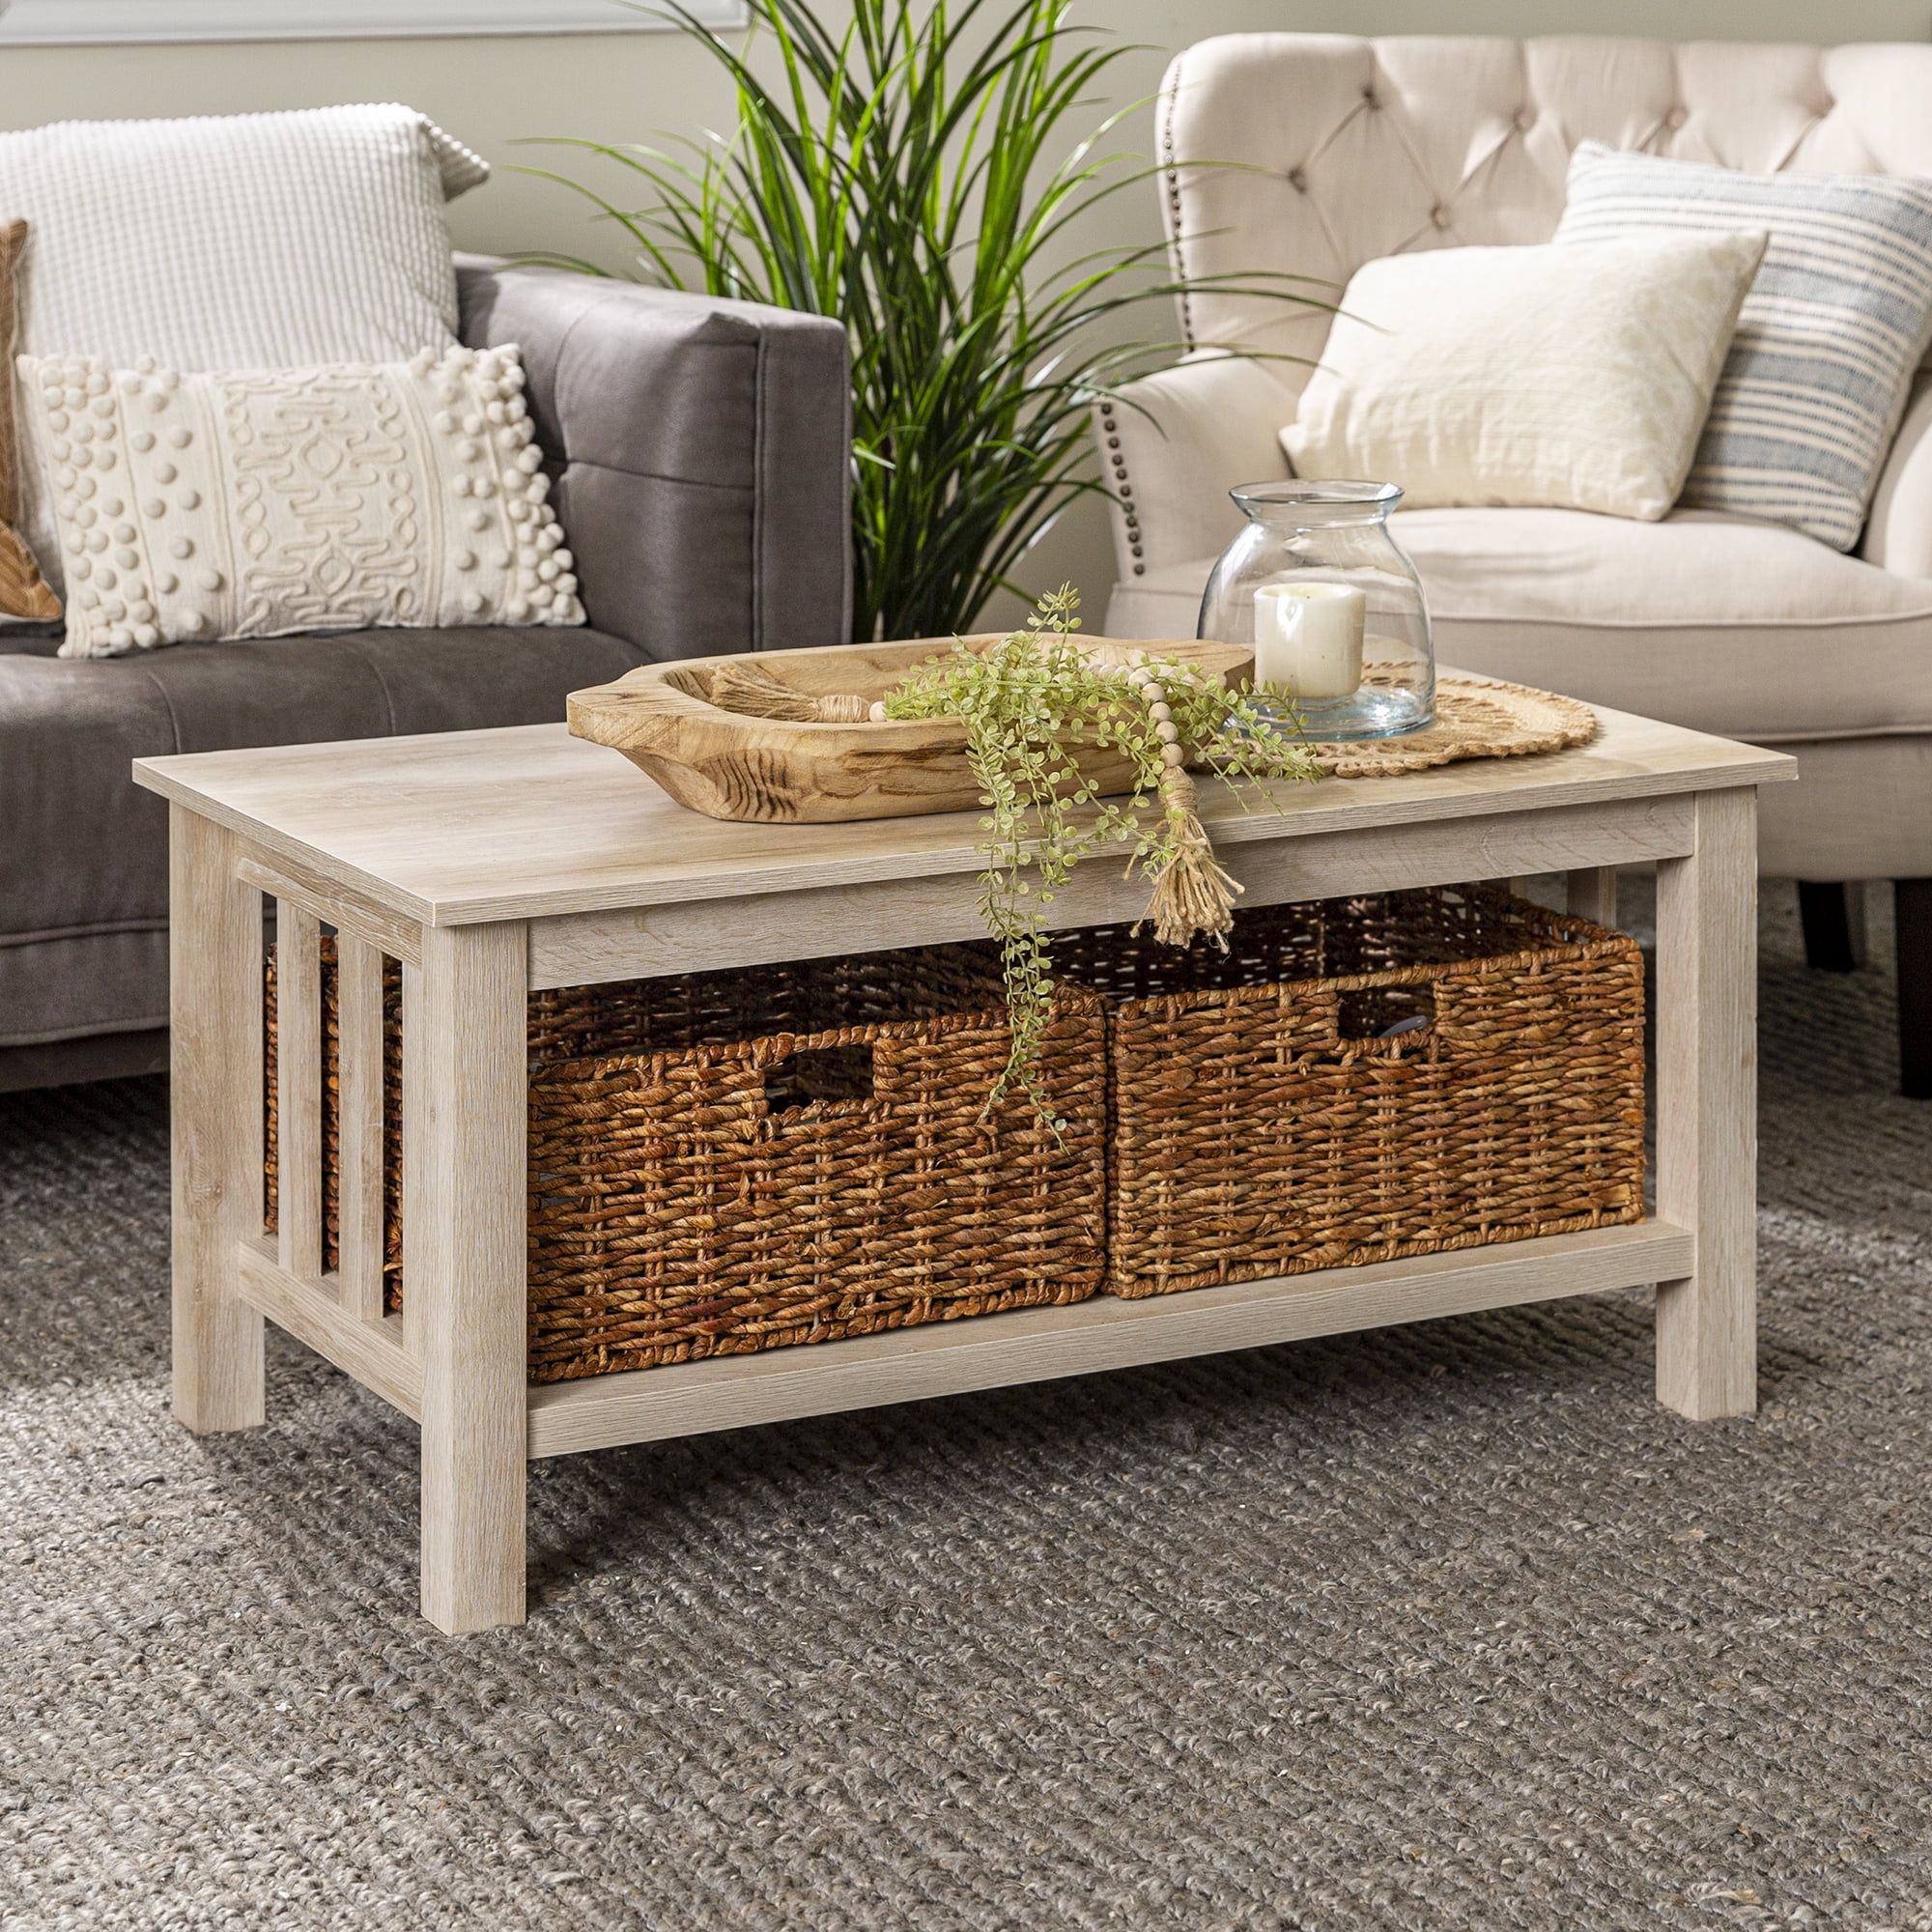 Woven Paths Traditional Storage Coffee Table With Bins, White Oak –  Walmart In Woven Paths Coffee Tables (View 2 of 15)